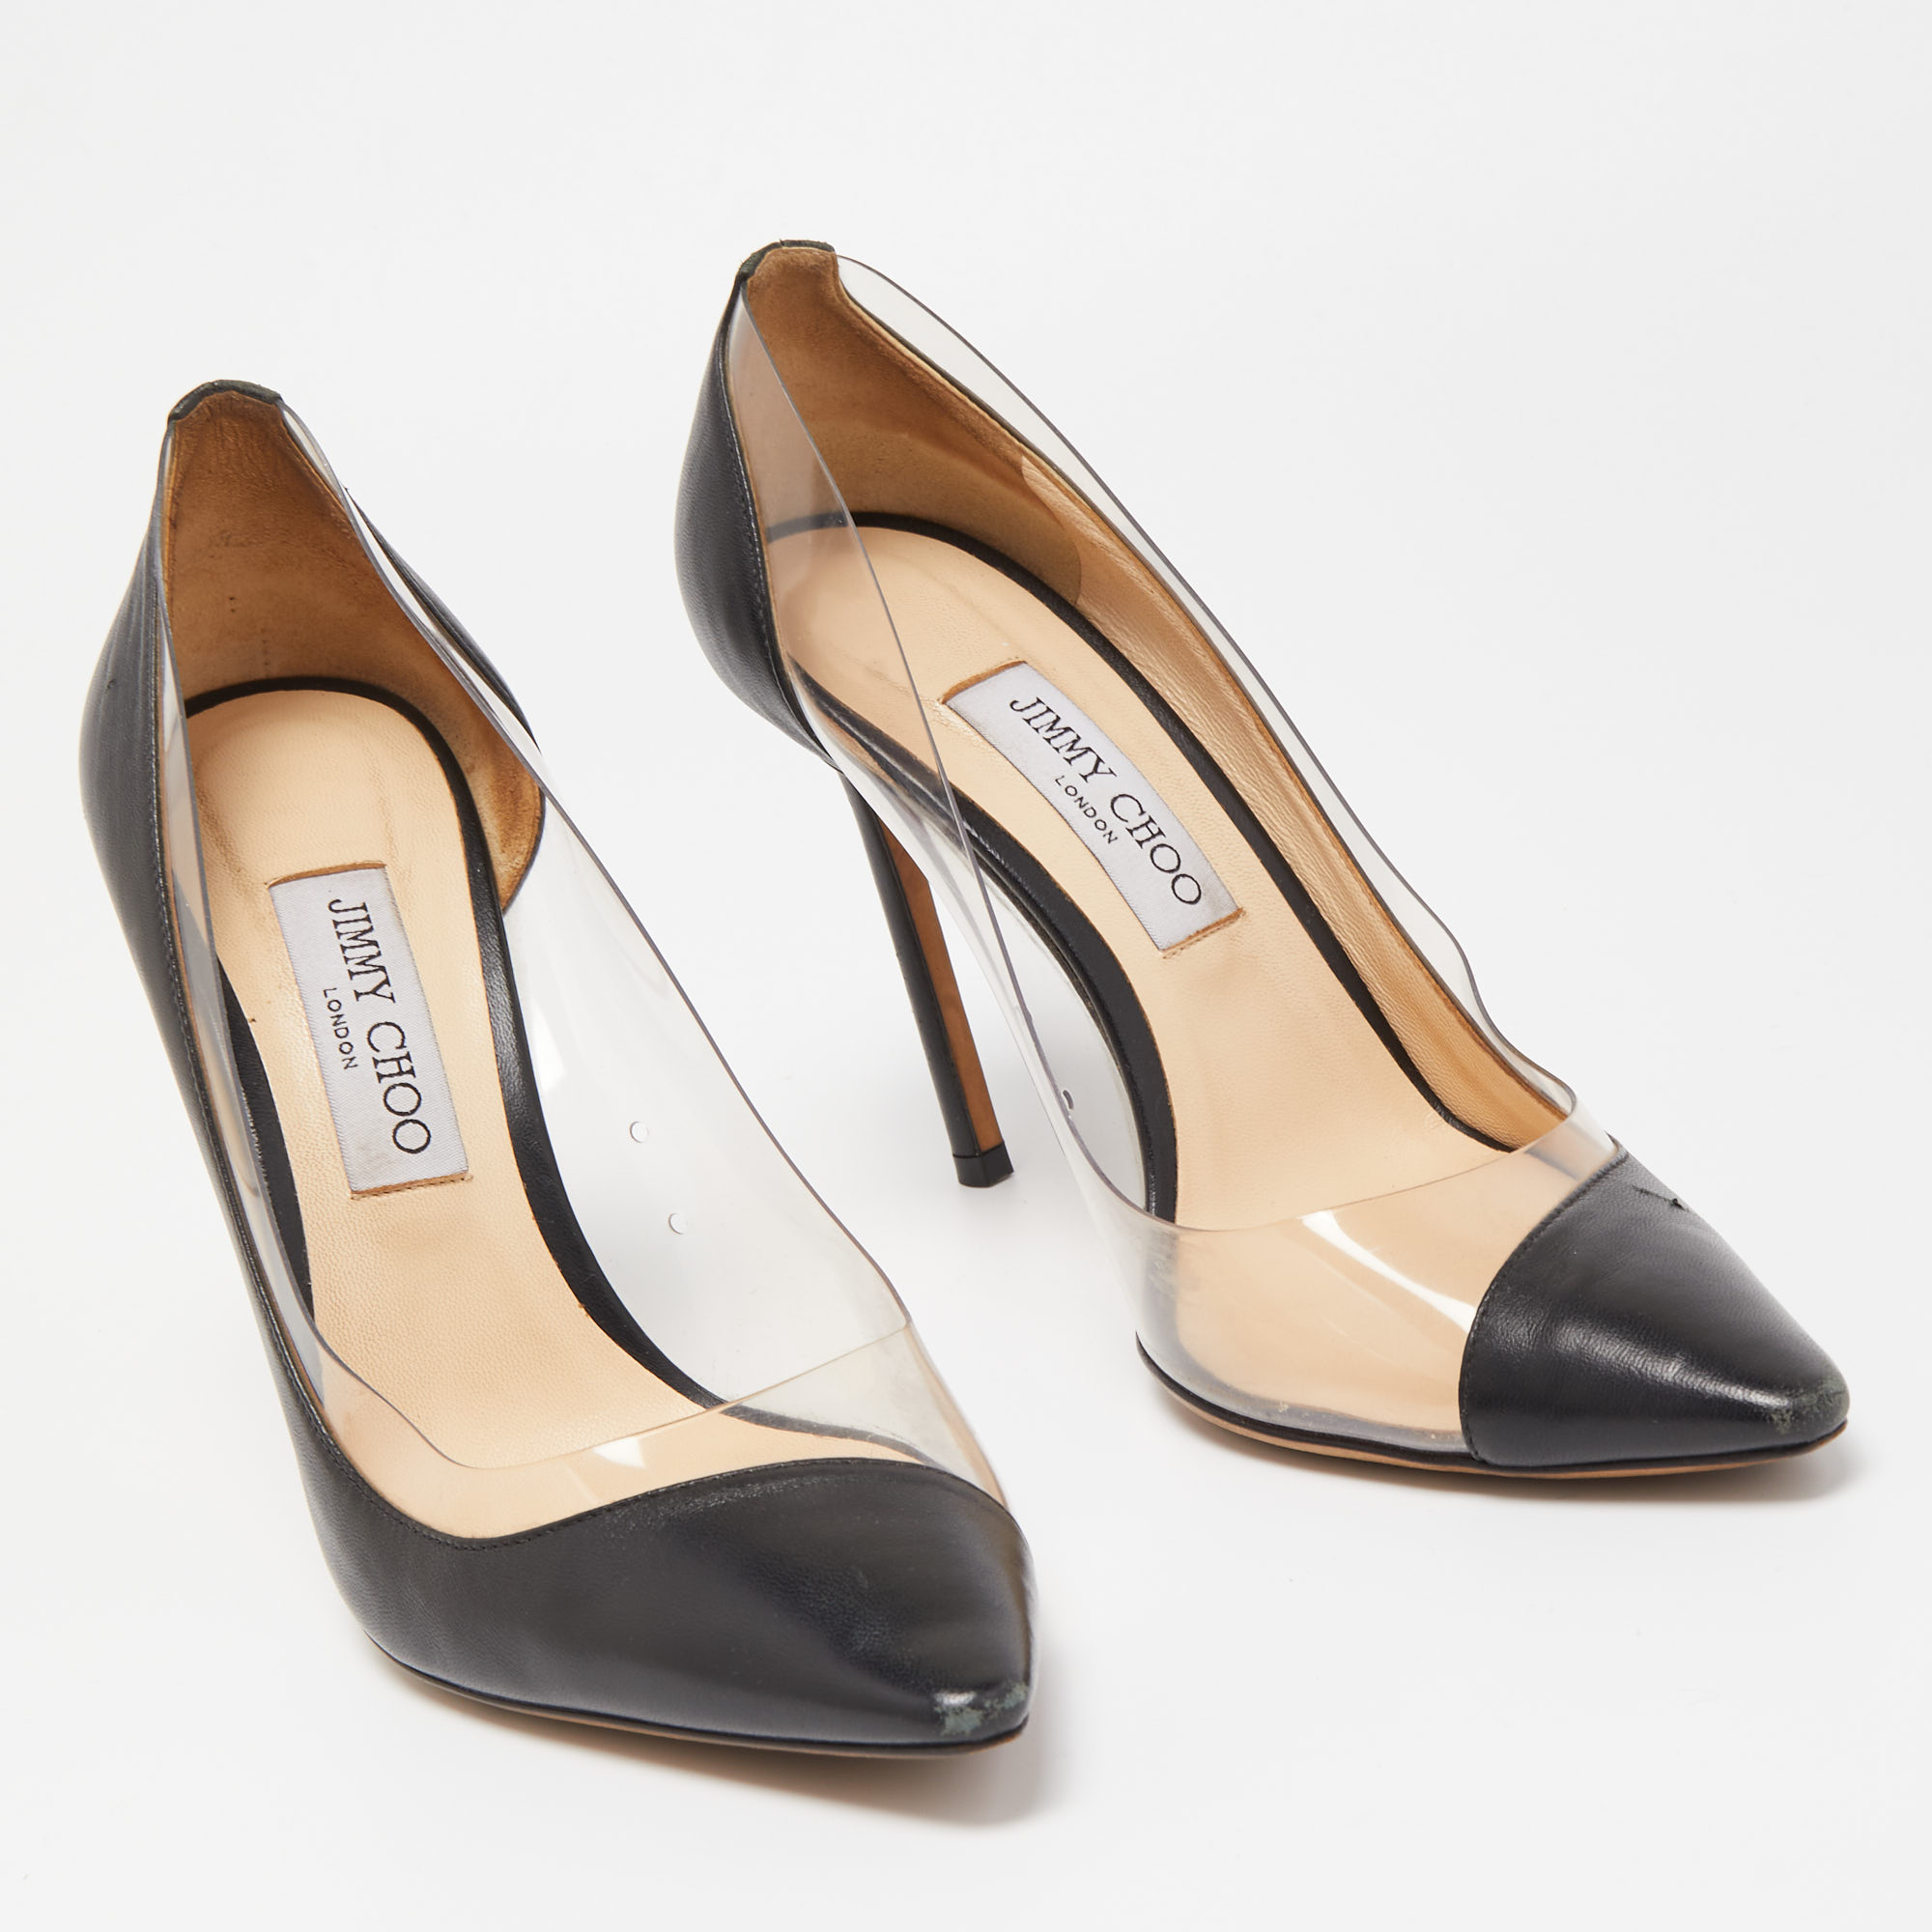 Jimmy Choo Black Leather And PVC Pointed Toe Pumps Size 40